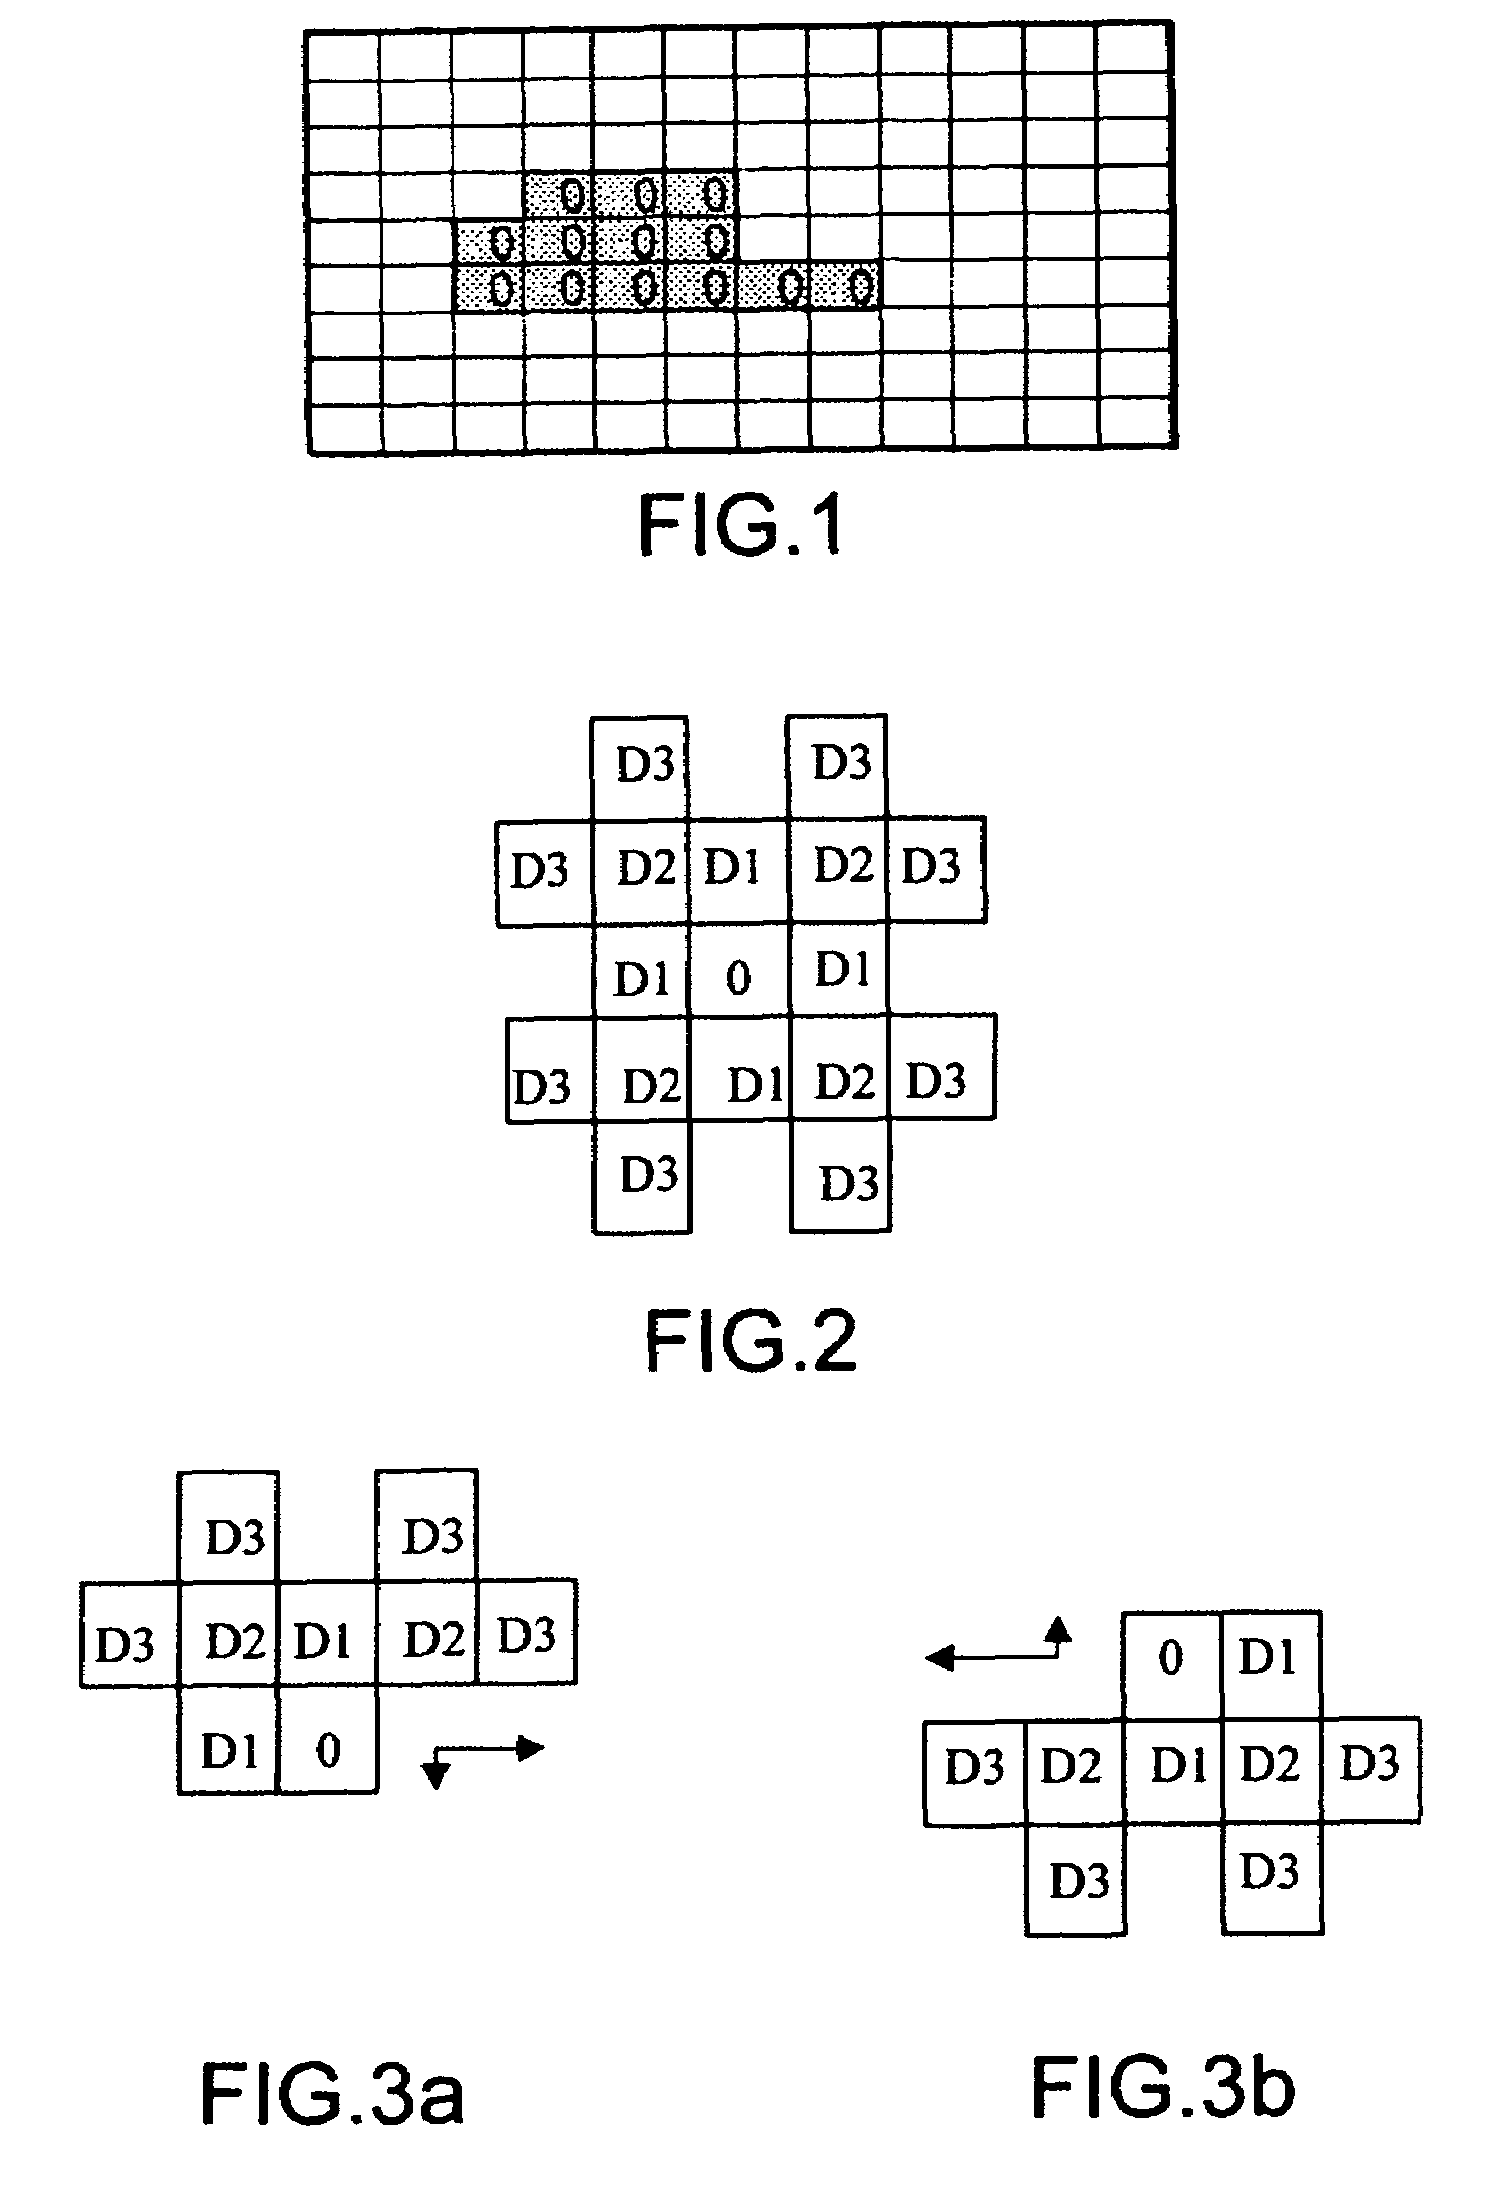 Lateral maneuverability map for a vehicle and method of obtaining it